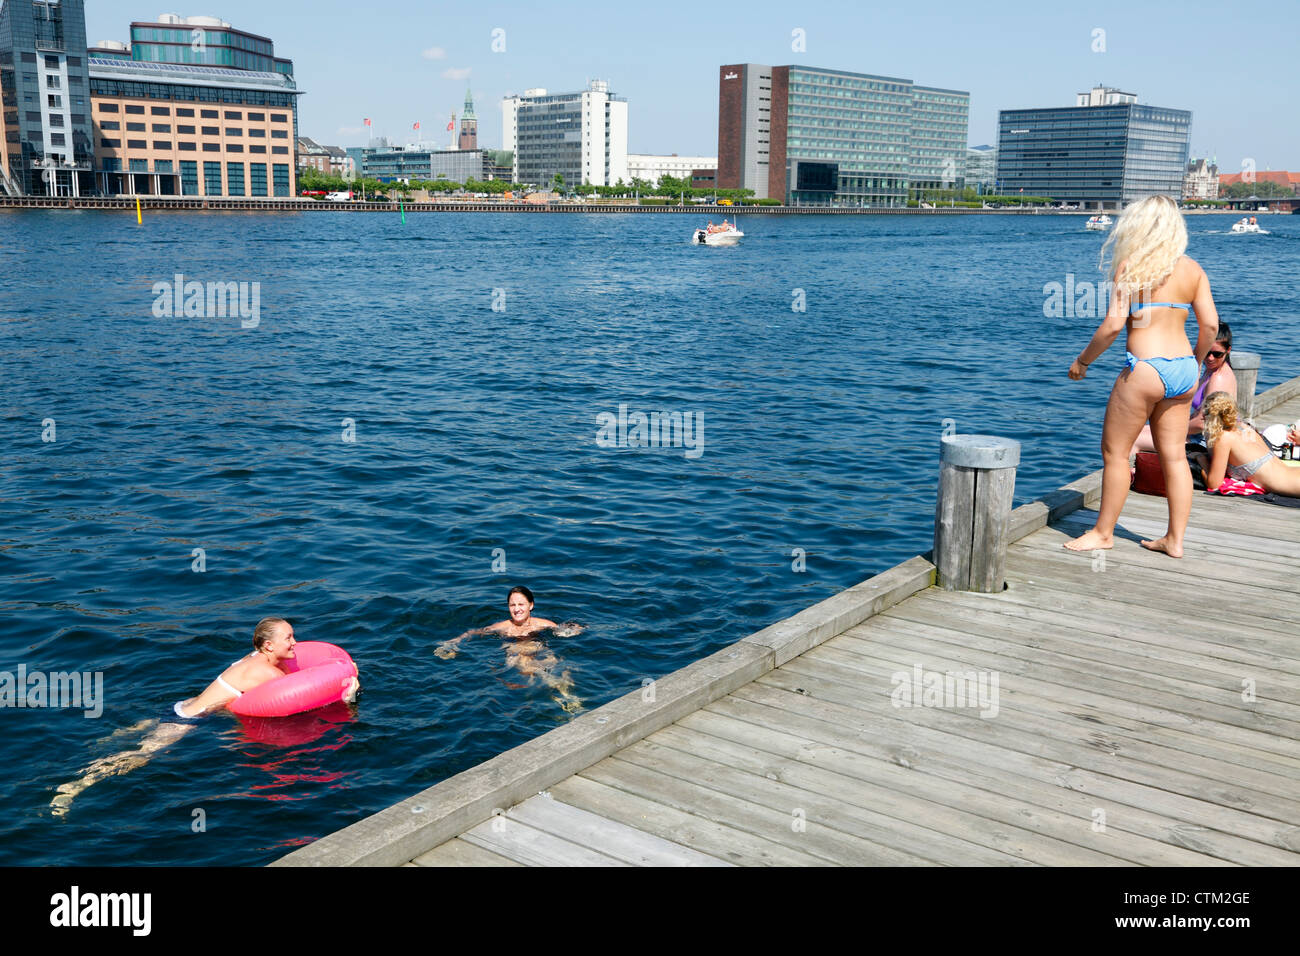 Girls sunbathing and bathing in the harbour from the Islands Brygge quay in  the port of Copenhagen, Denmark Stock Photo - Alamy